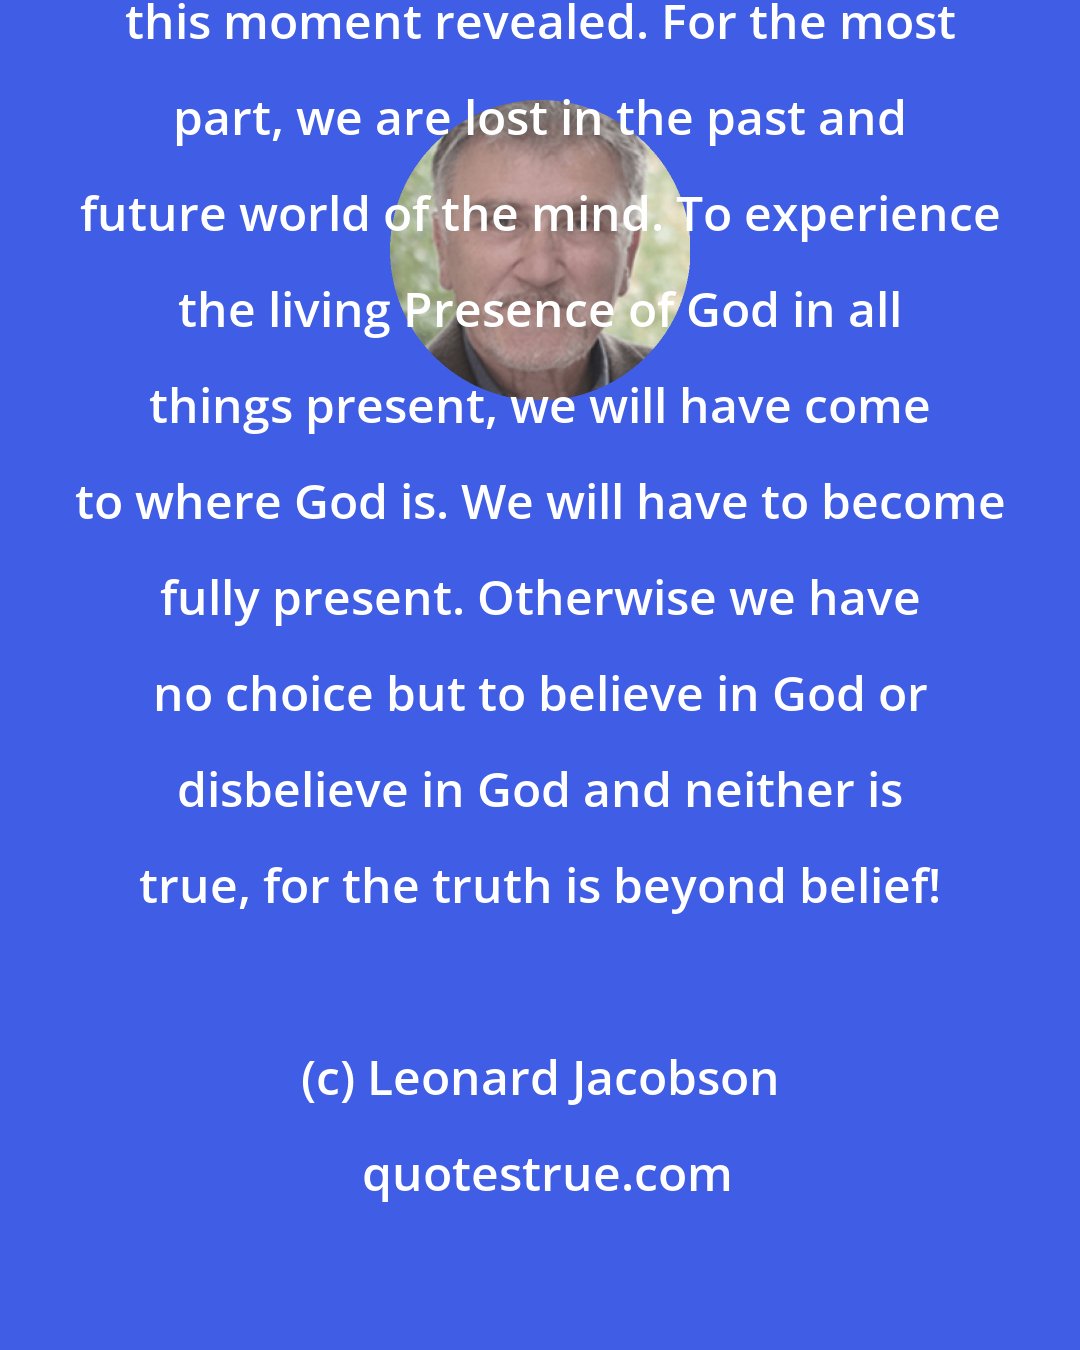 Leonard Jacobson: God is real. God is here now. God is this moment revealed. For the most part, we are lost in the past and future world of the mind. To experience the living Presence of God in all things present, we will have come to where God is. We will have to become fully present. Otherwise we have no choice but to believe in God or disbelieve in God and neither is true, for the truth is beyond belief!